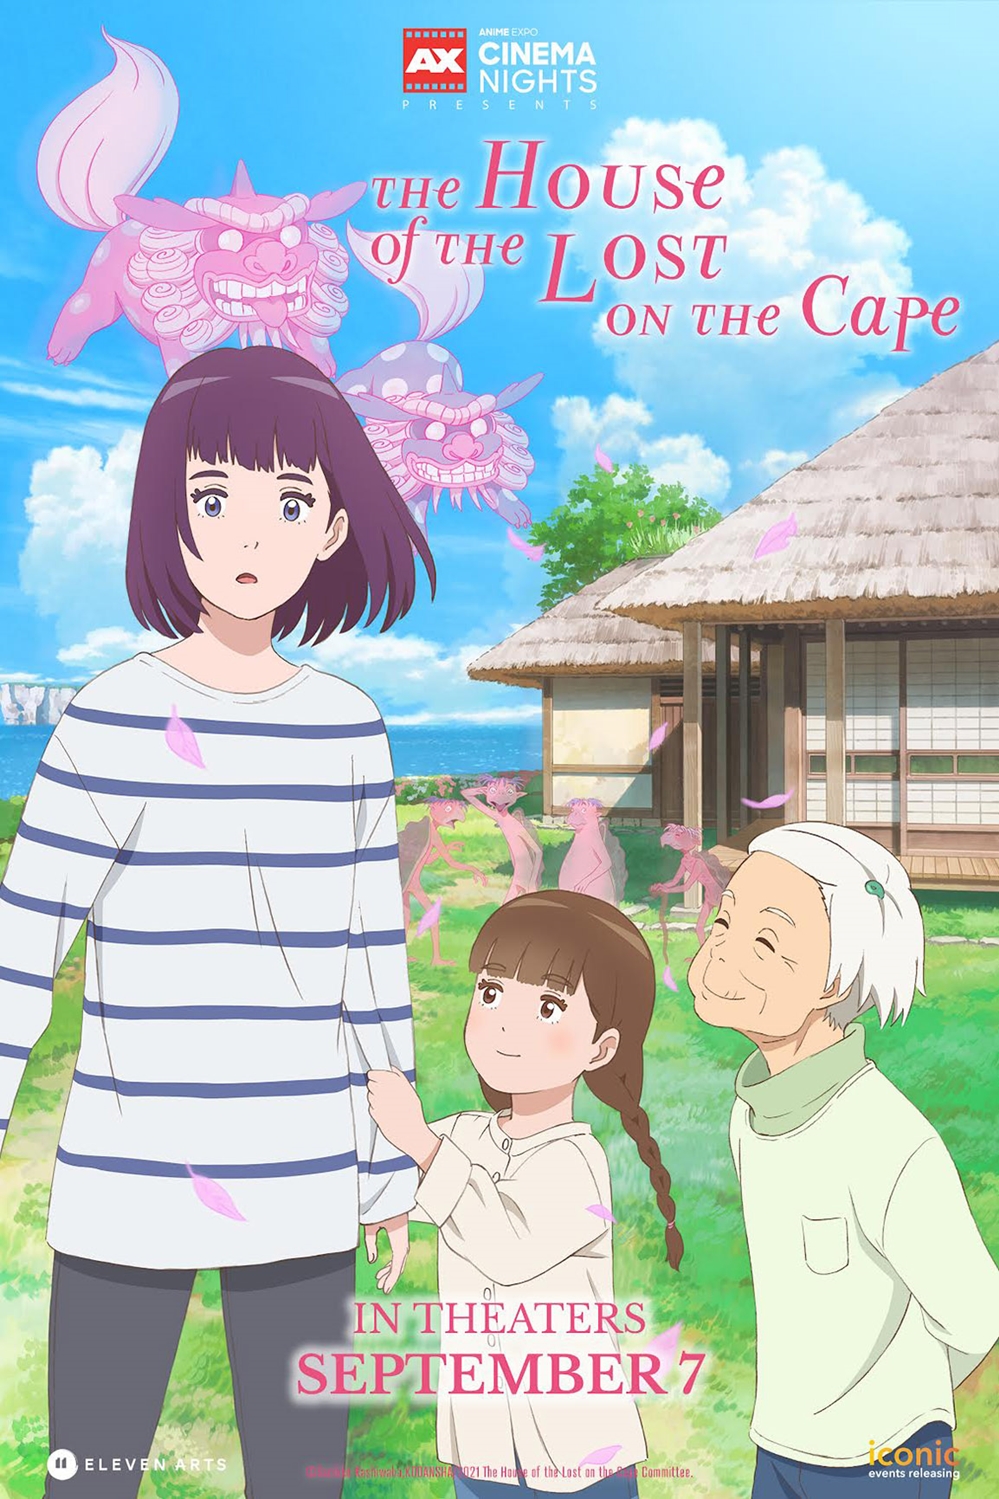 Is The House of the Lost on the Cape (2022) available on Netflix